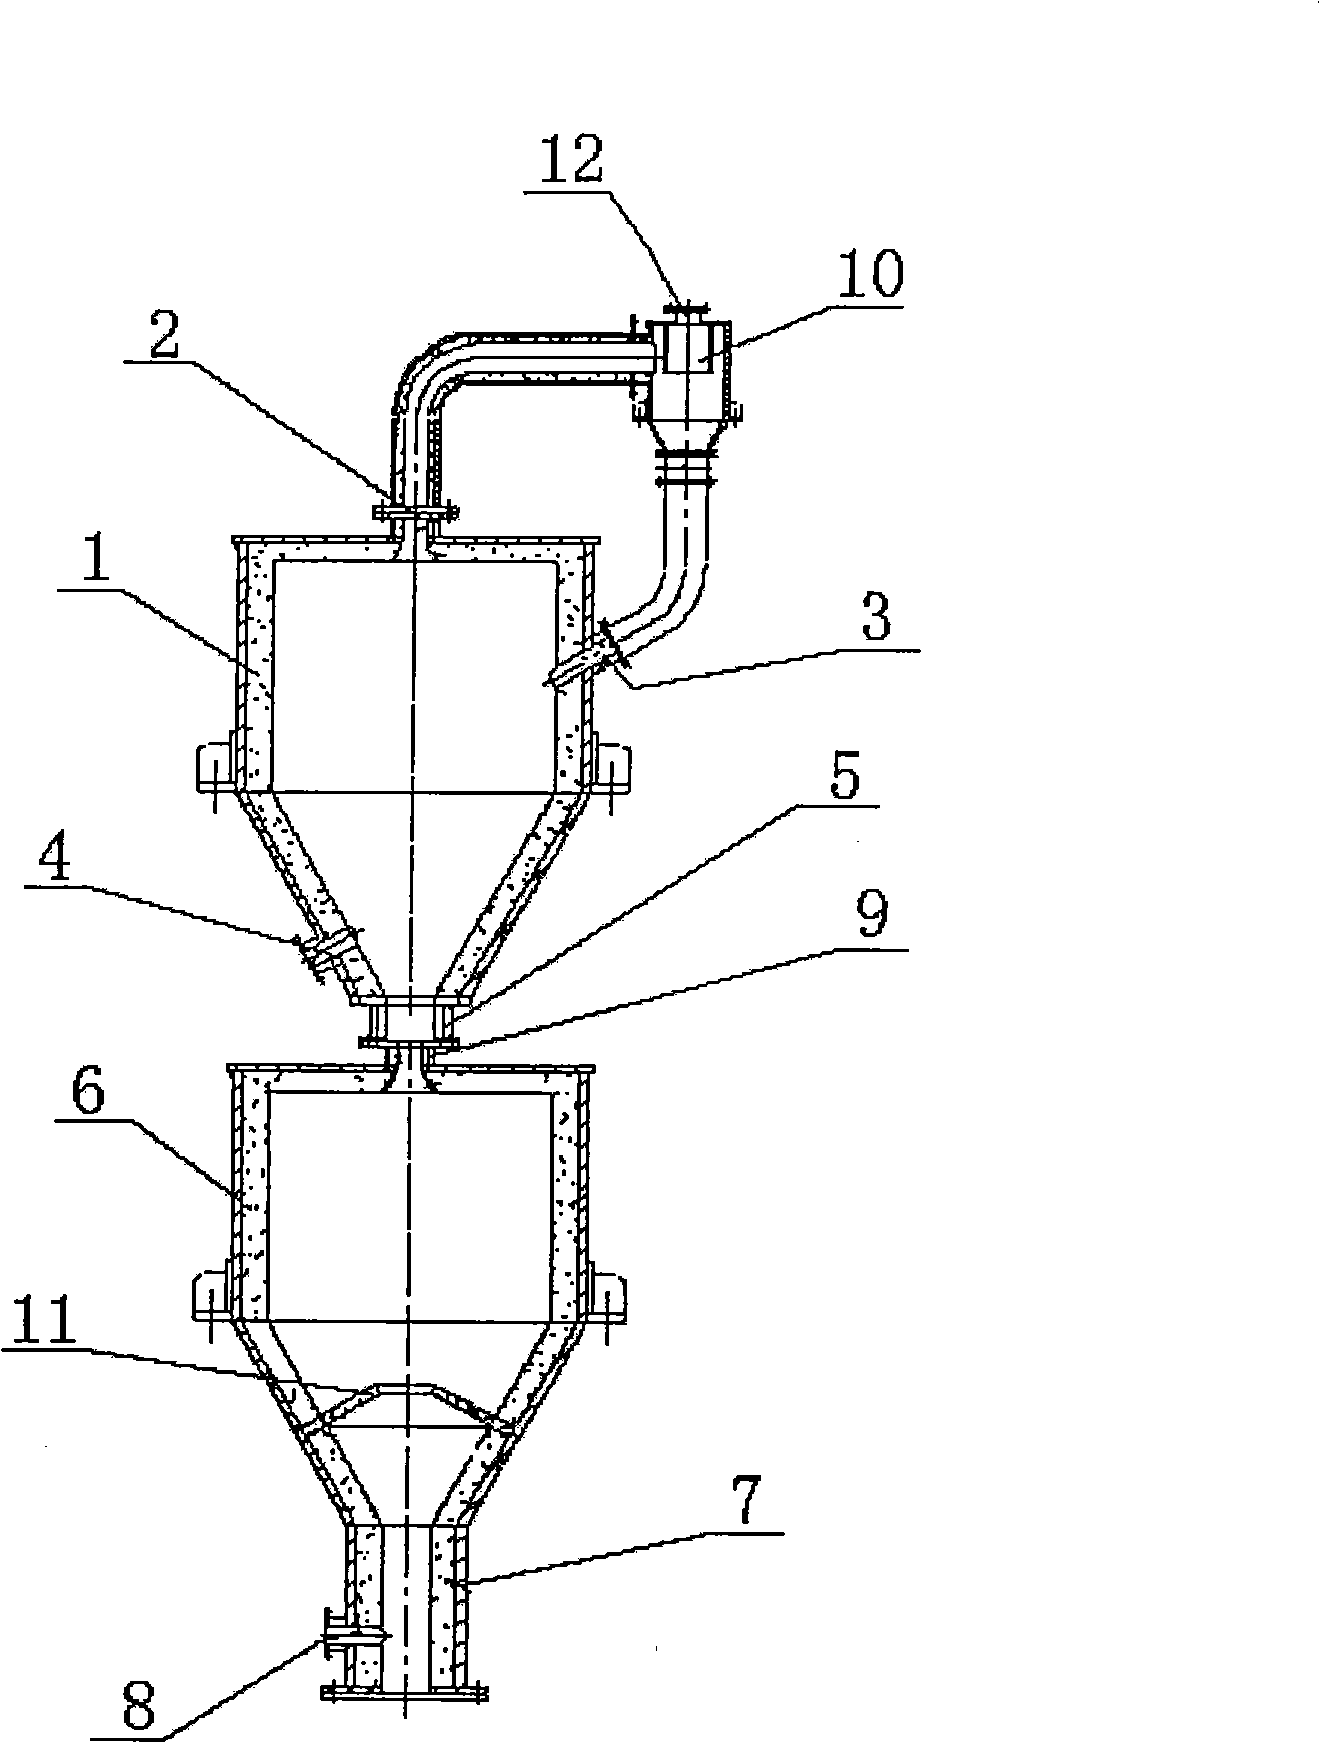 Method for drying and burning alkali-containing aluminosilicate slurry